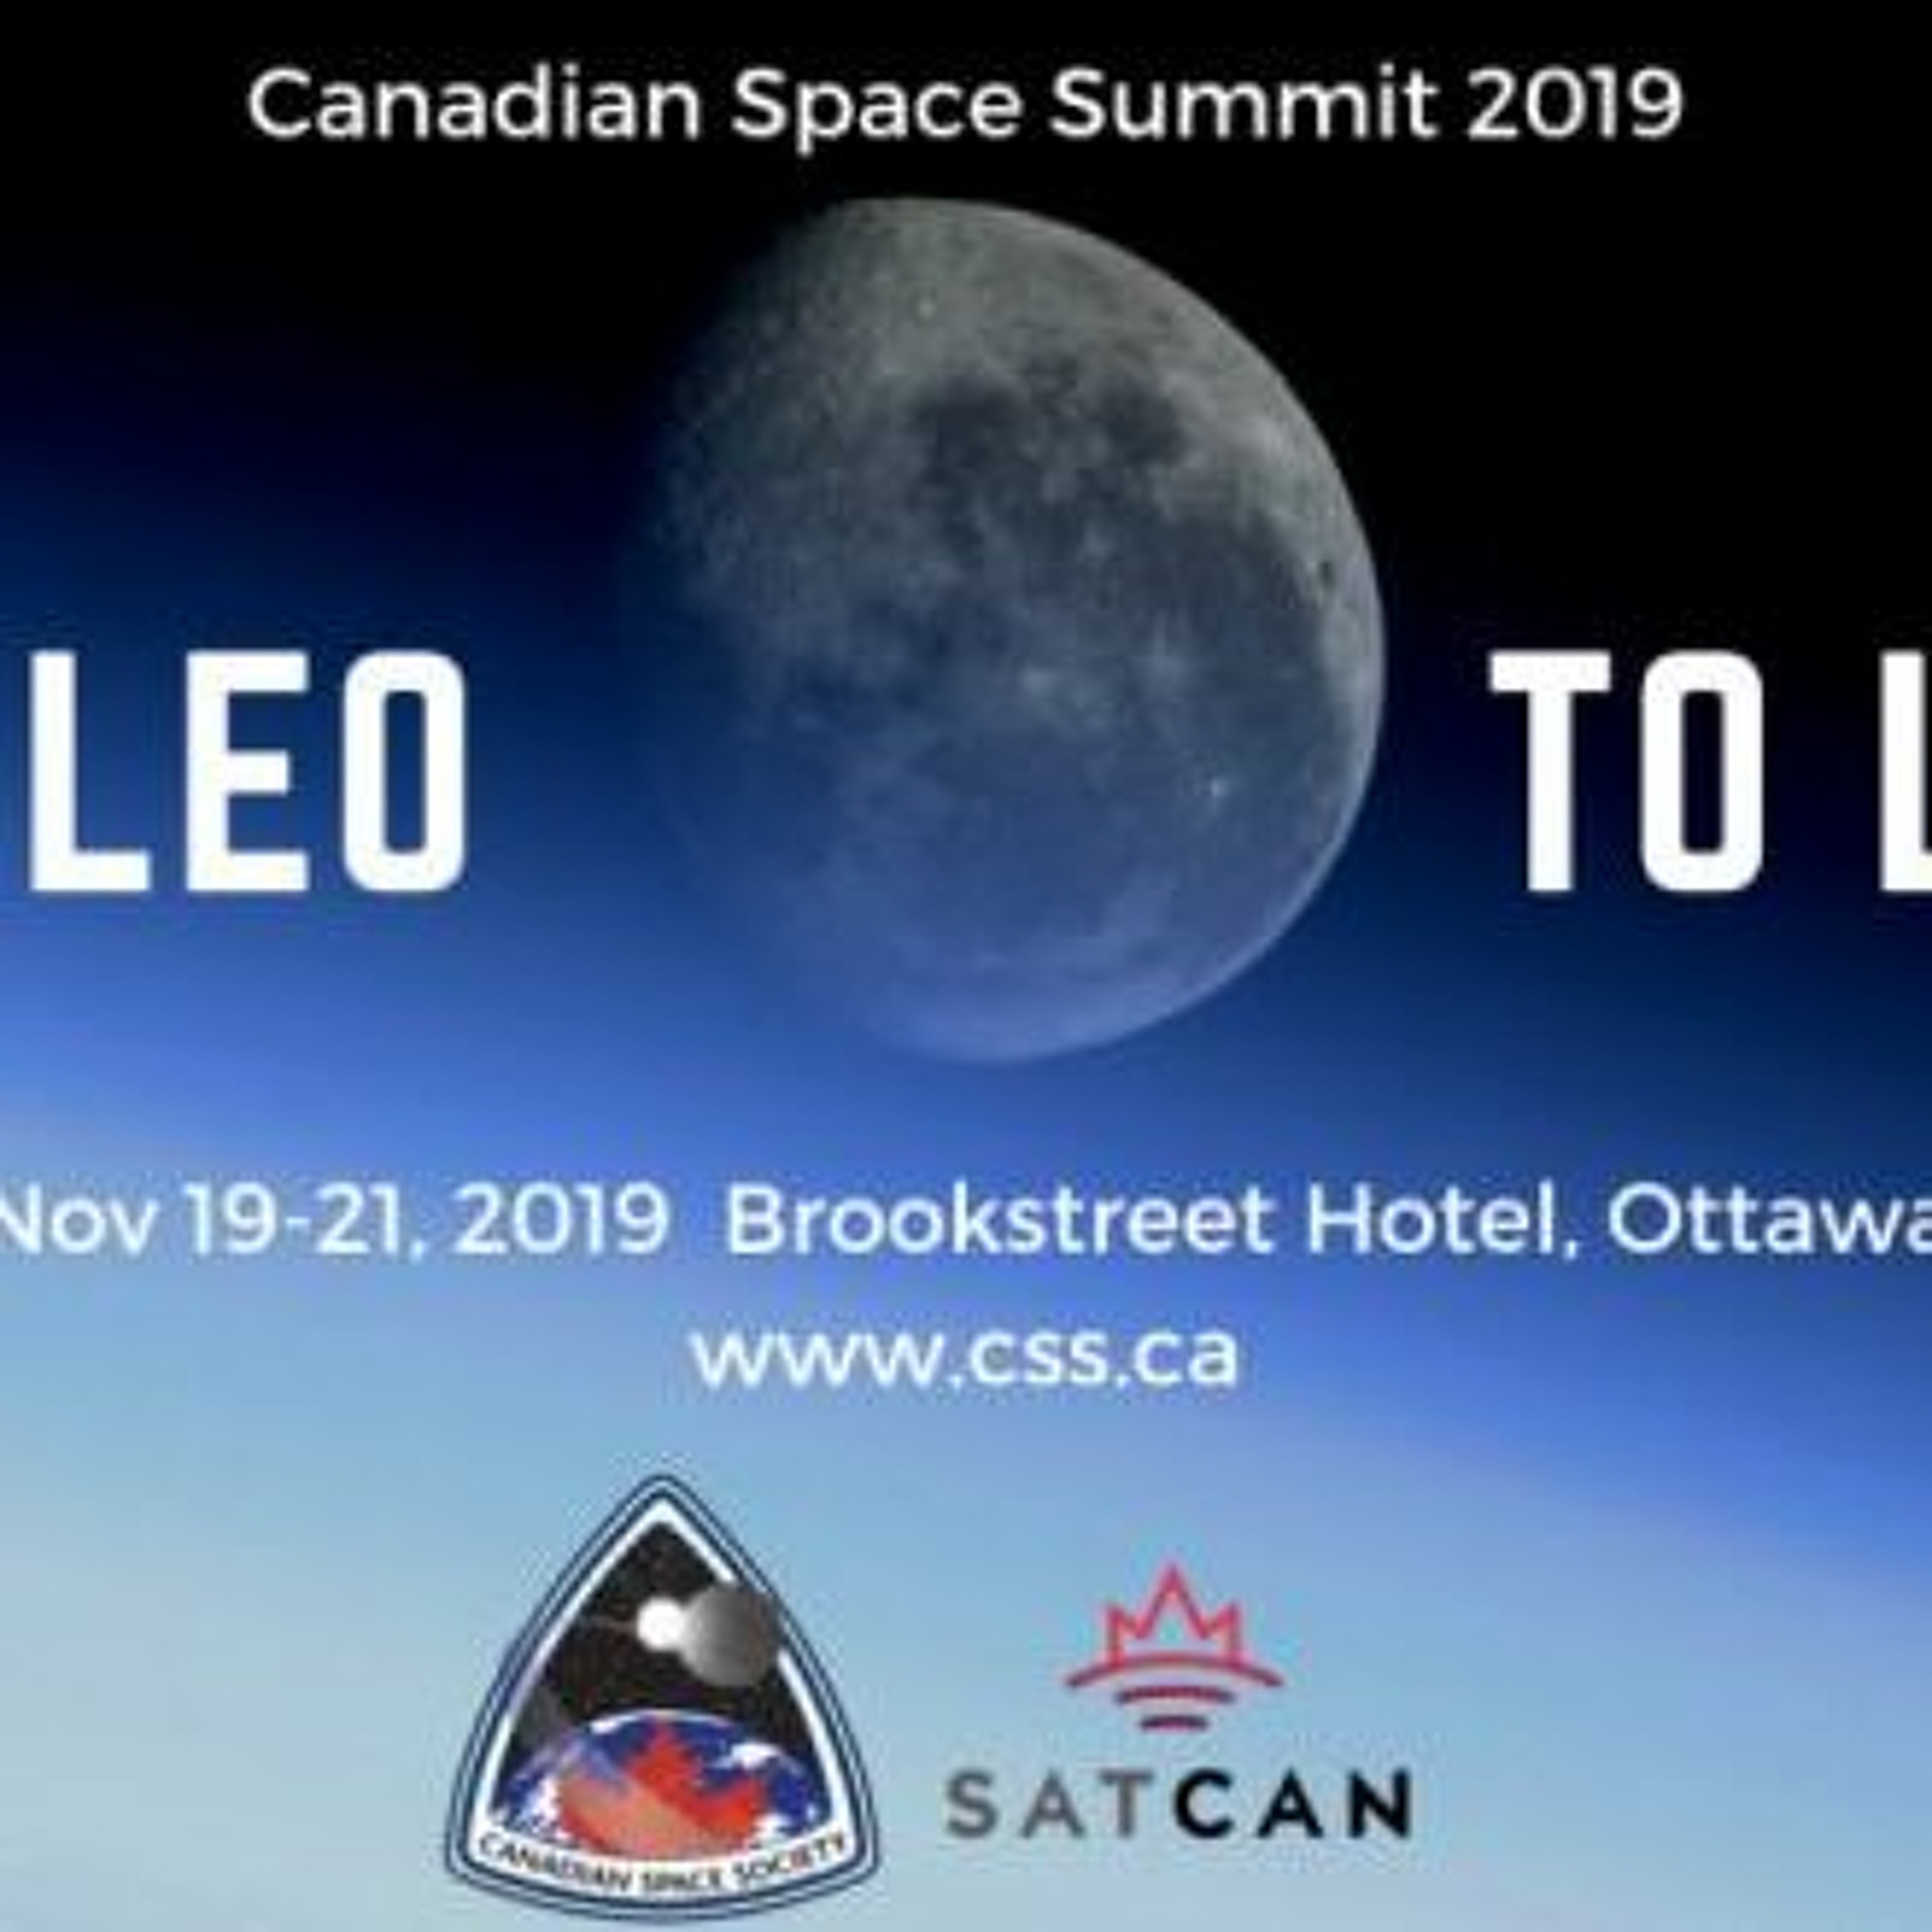 A Recap of the 2019 Canadian Space Summit